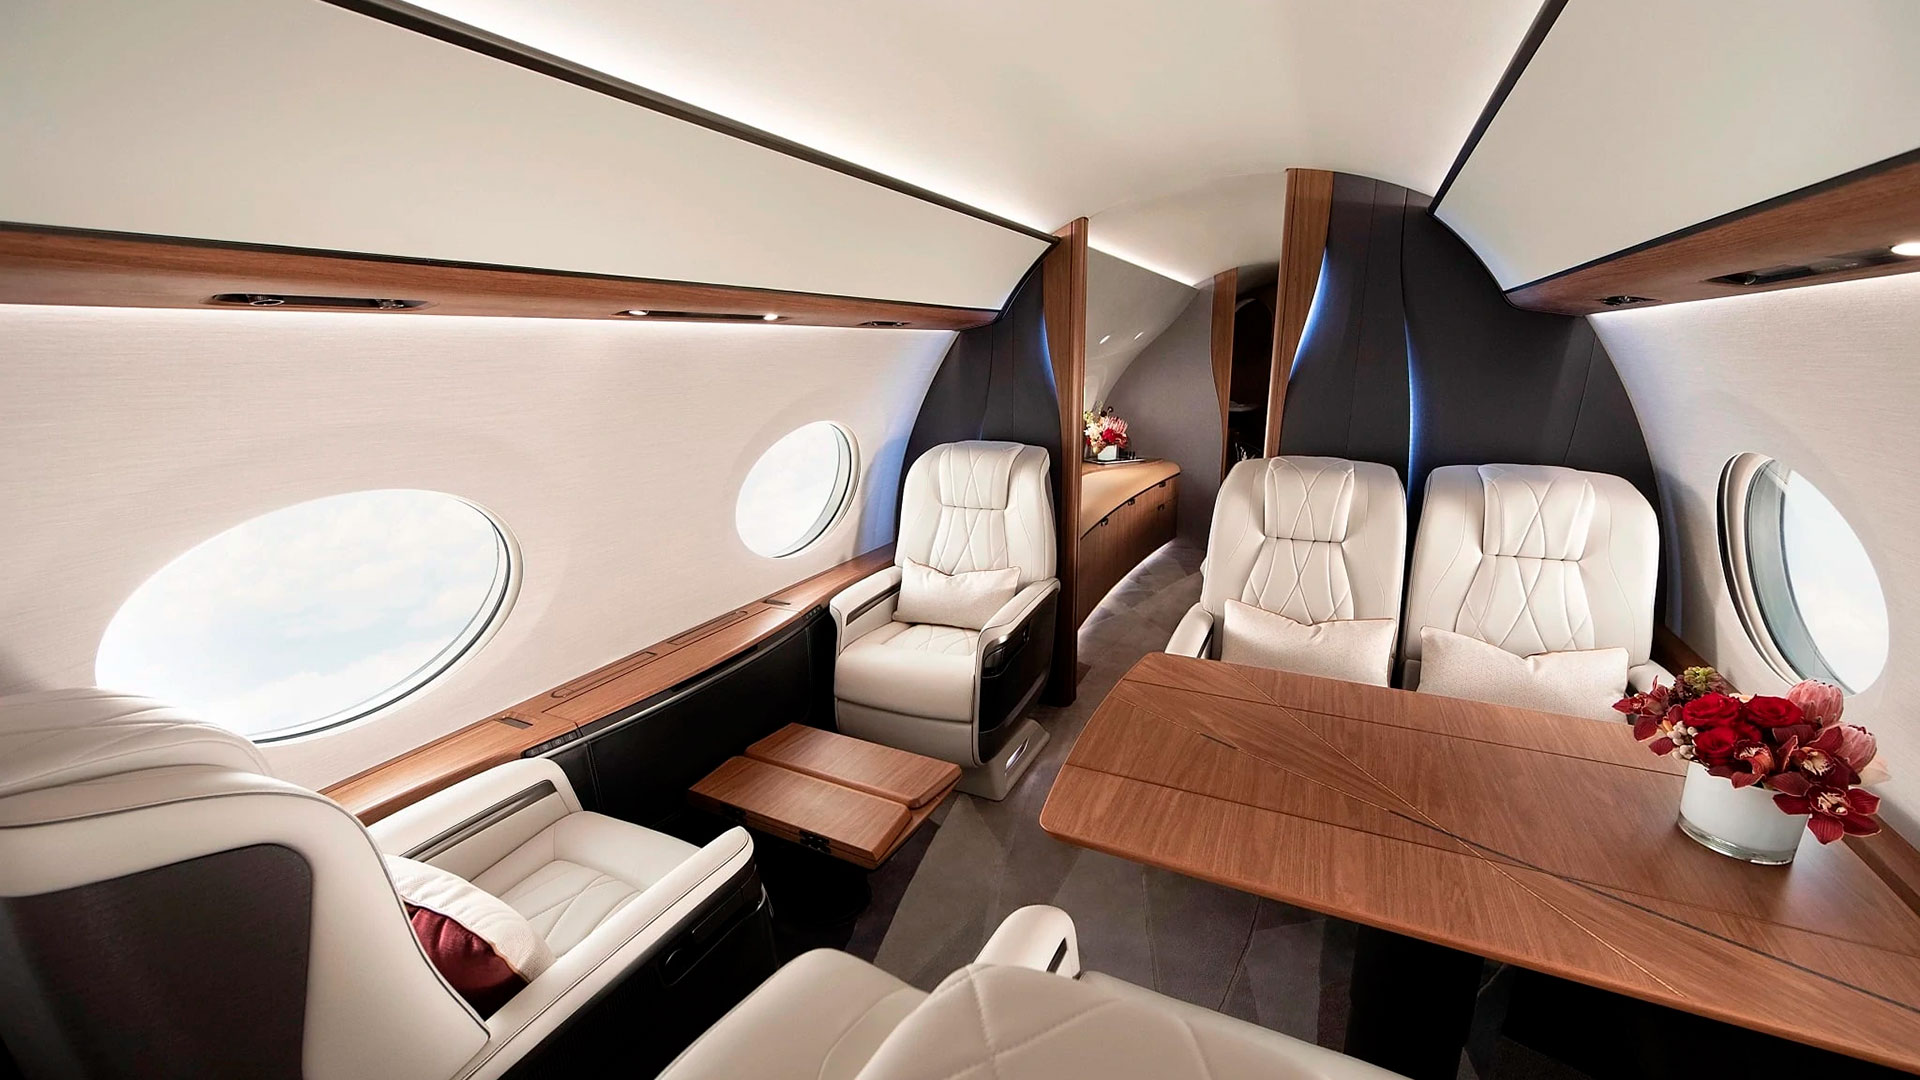 The plane has panoramic oval windows and seats that can be converted into comfortable beds